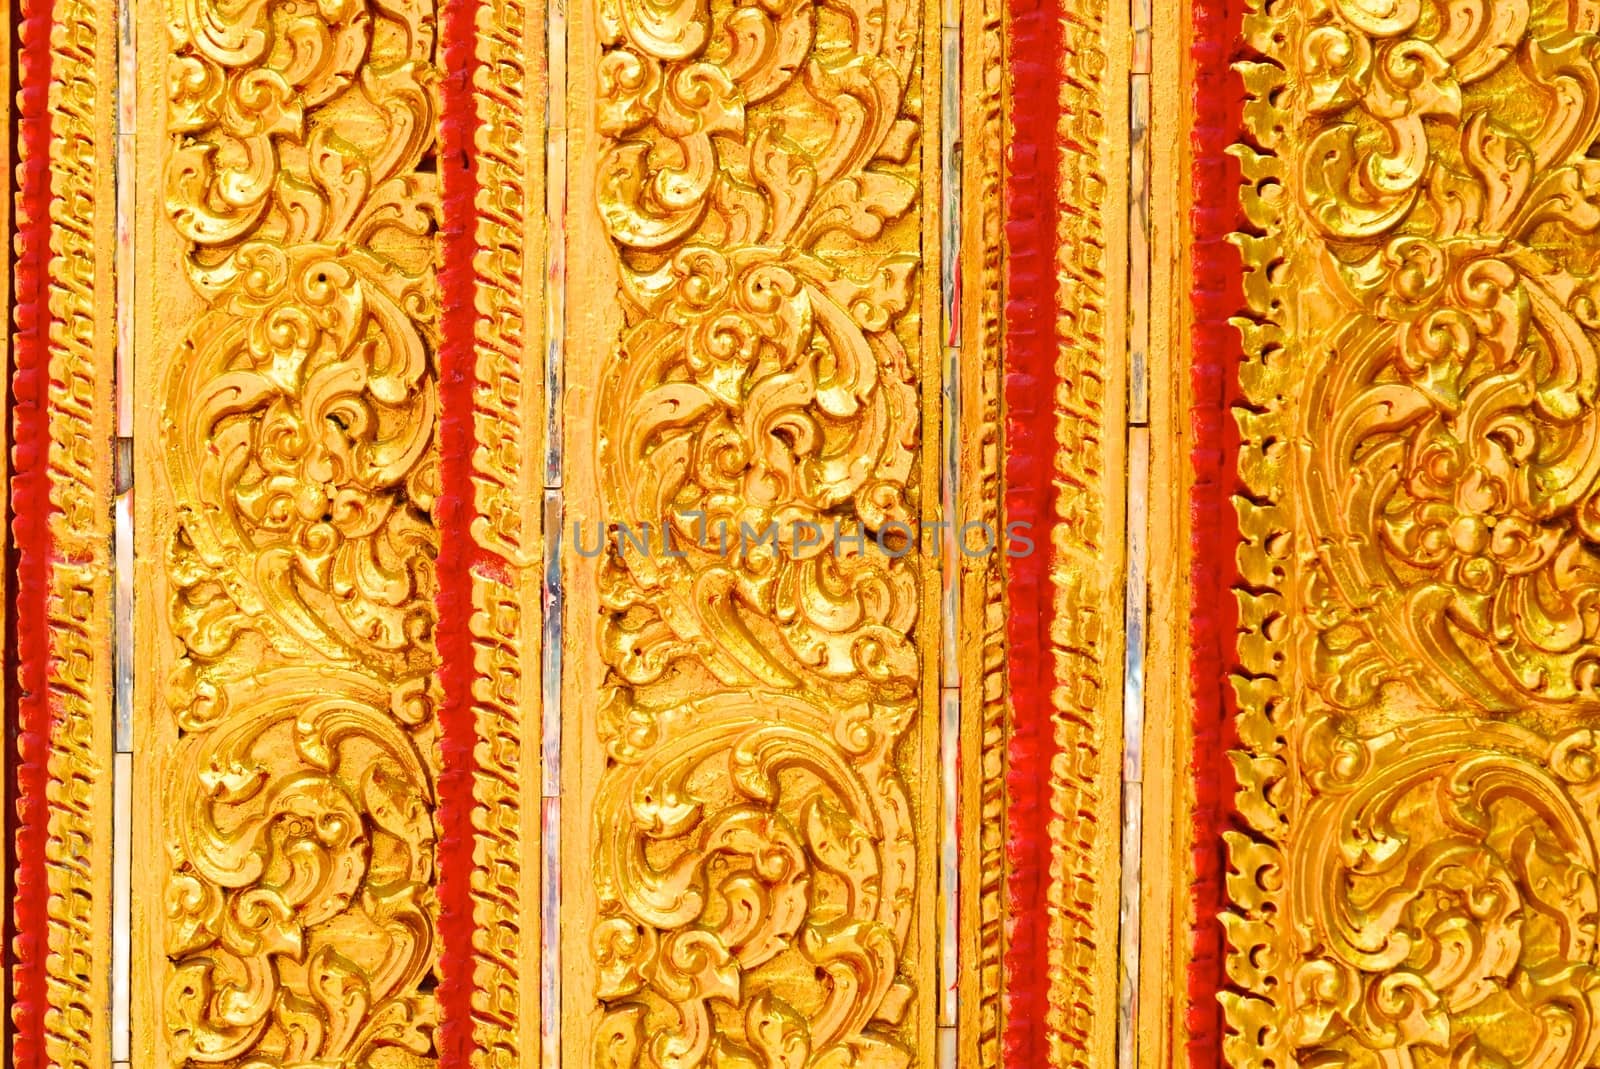 stucco work in thai art that usually decorated with mirror and precious stone or gold leaf,Chiang rai temple,Thailand